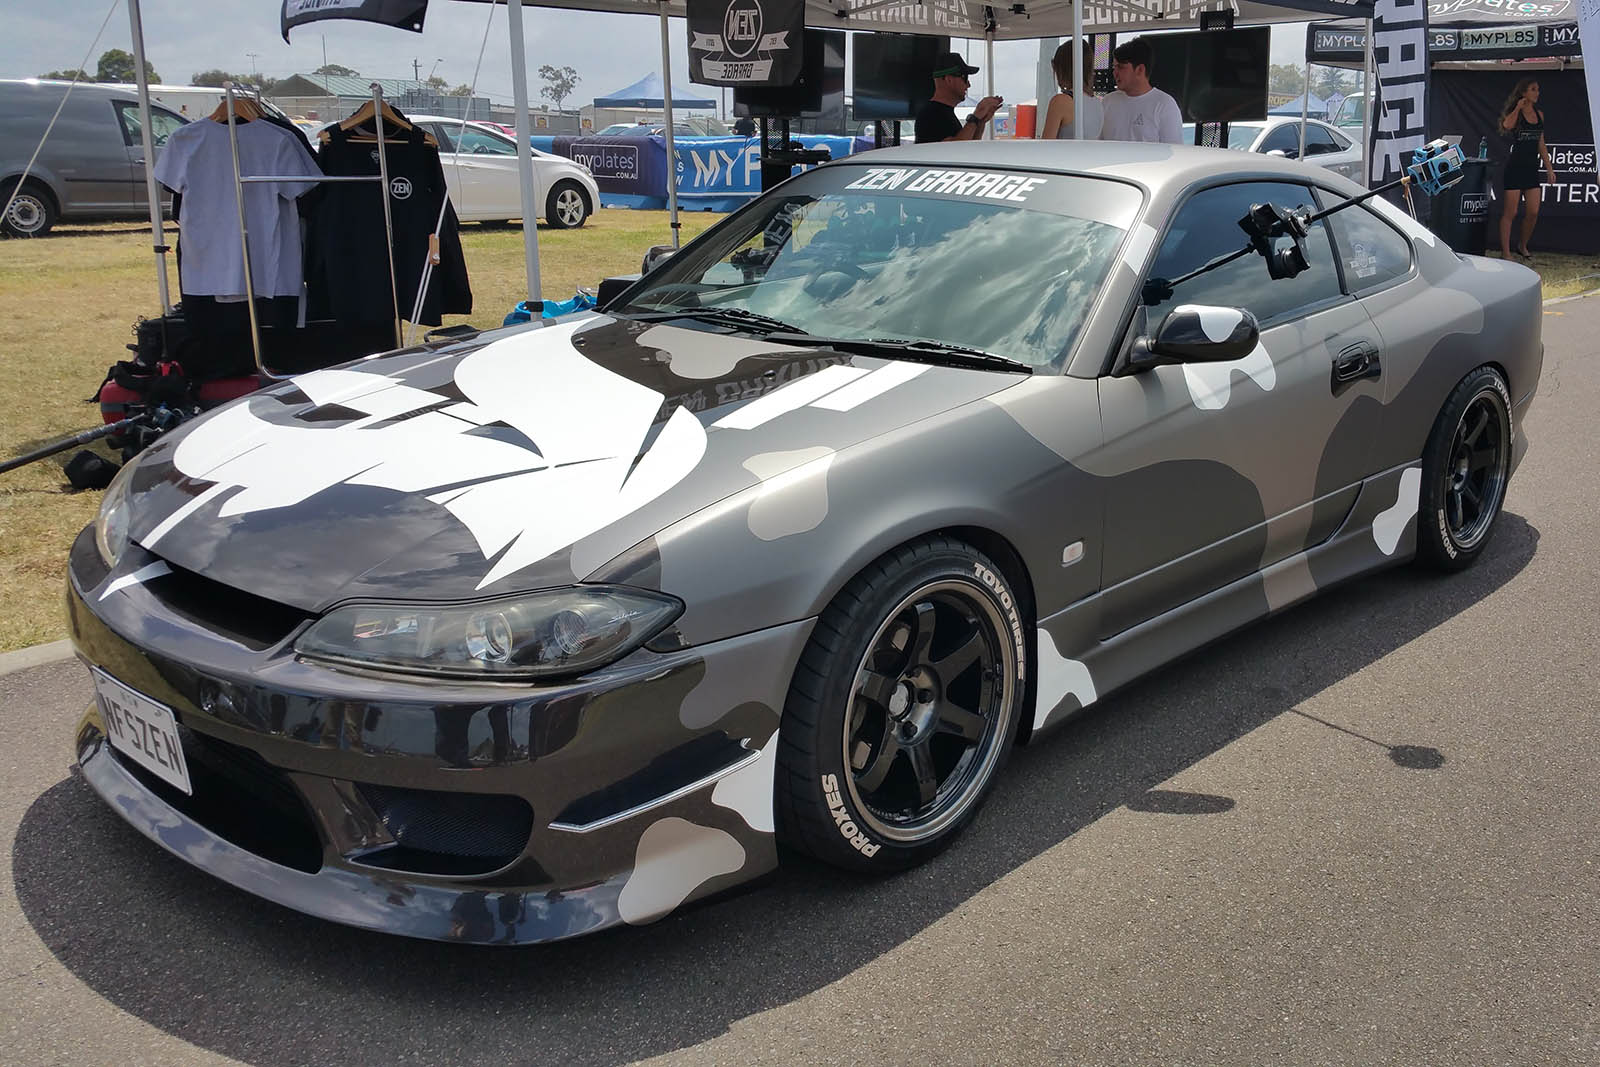 Need For Speed - Crew Create project S15 by Zen Garage with 360 rig mounted on the passenger window